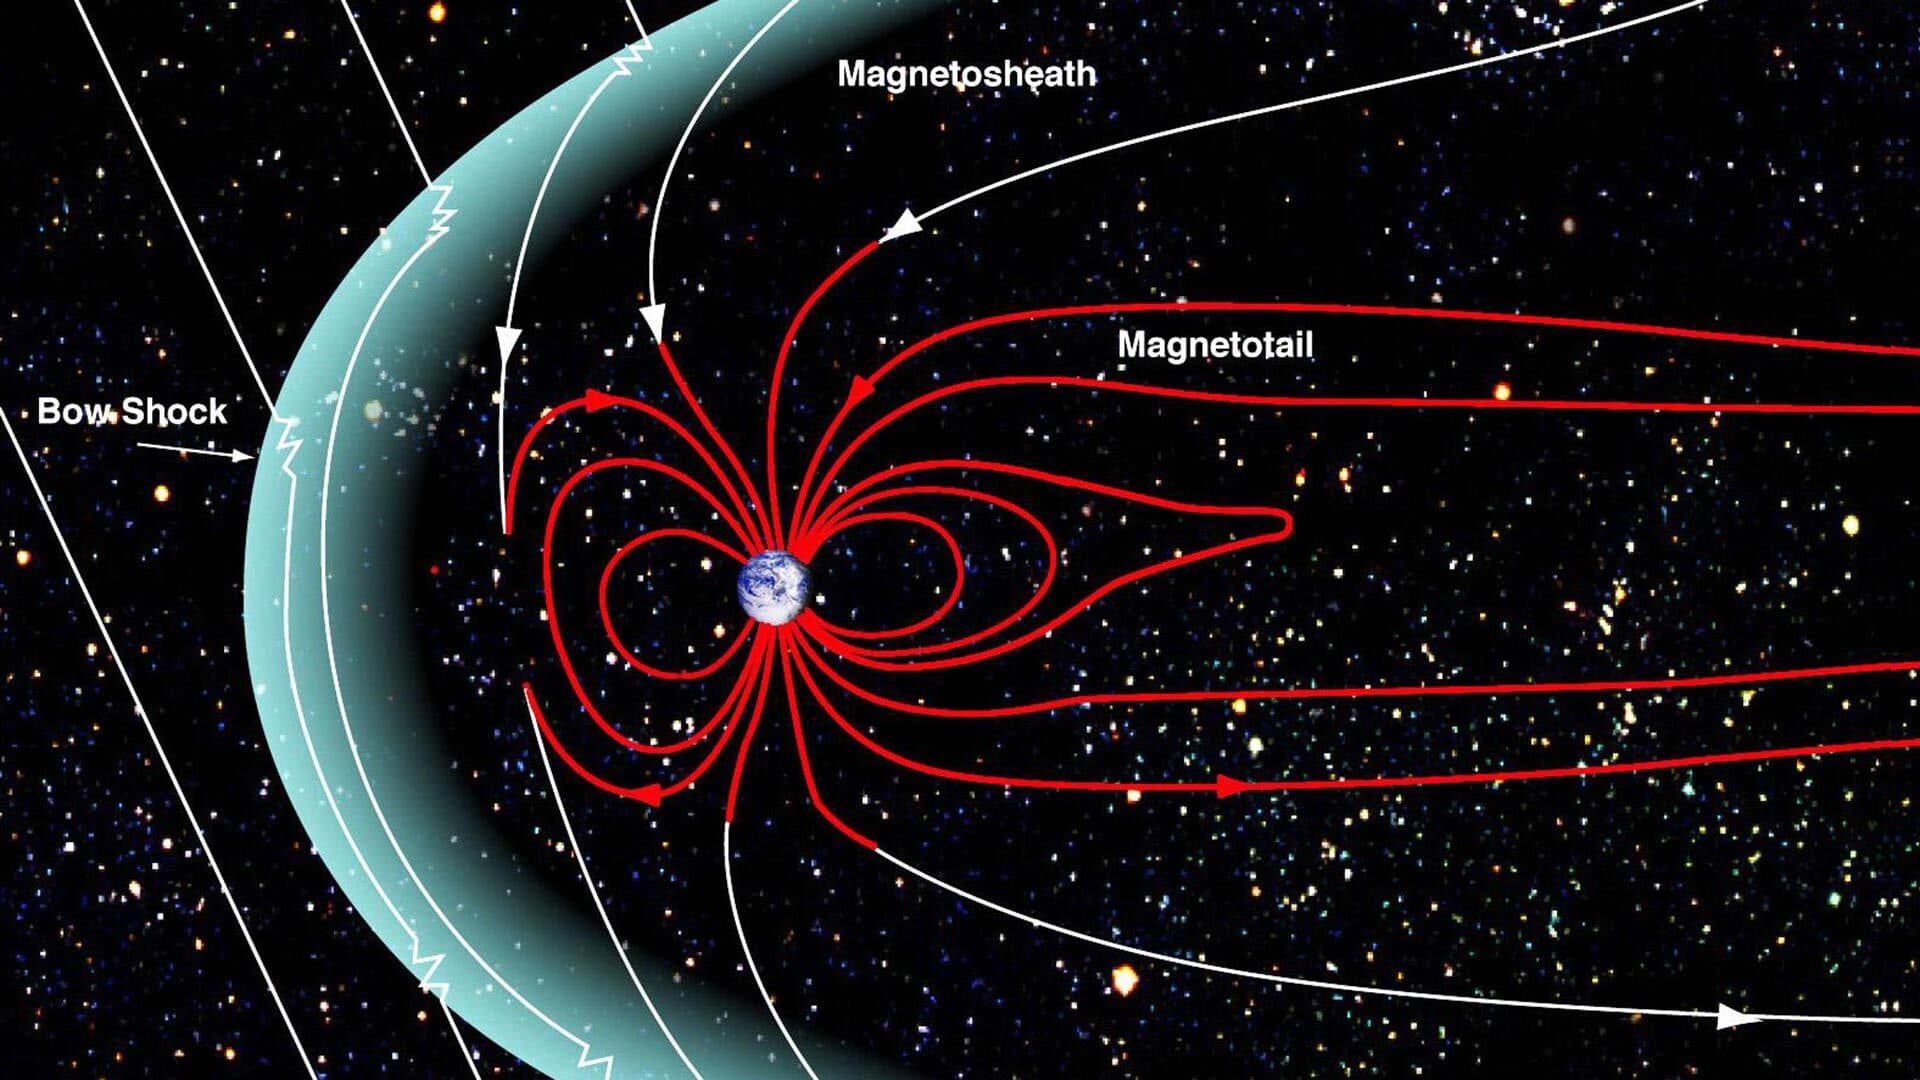 Illustration of space showing bow shock, magnetosheath and magnetotail